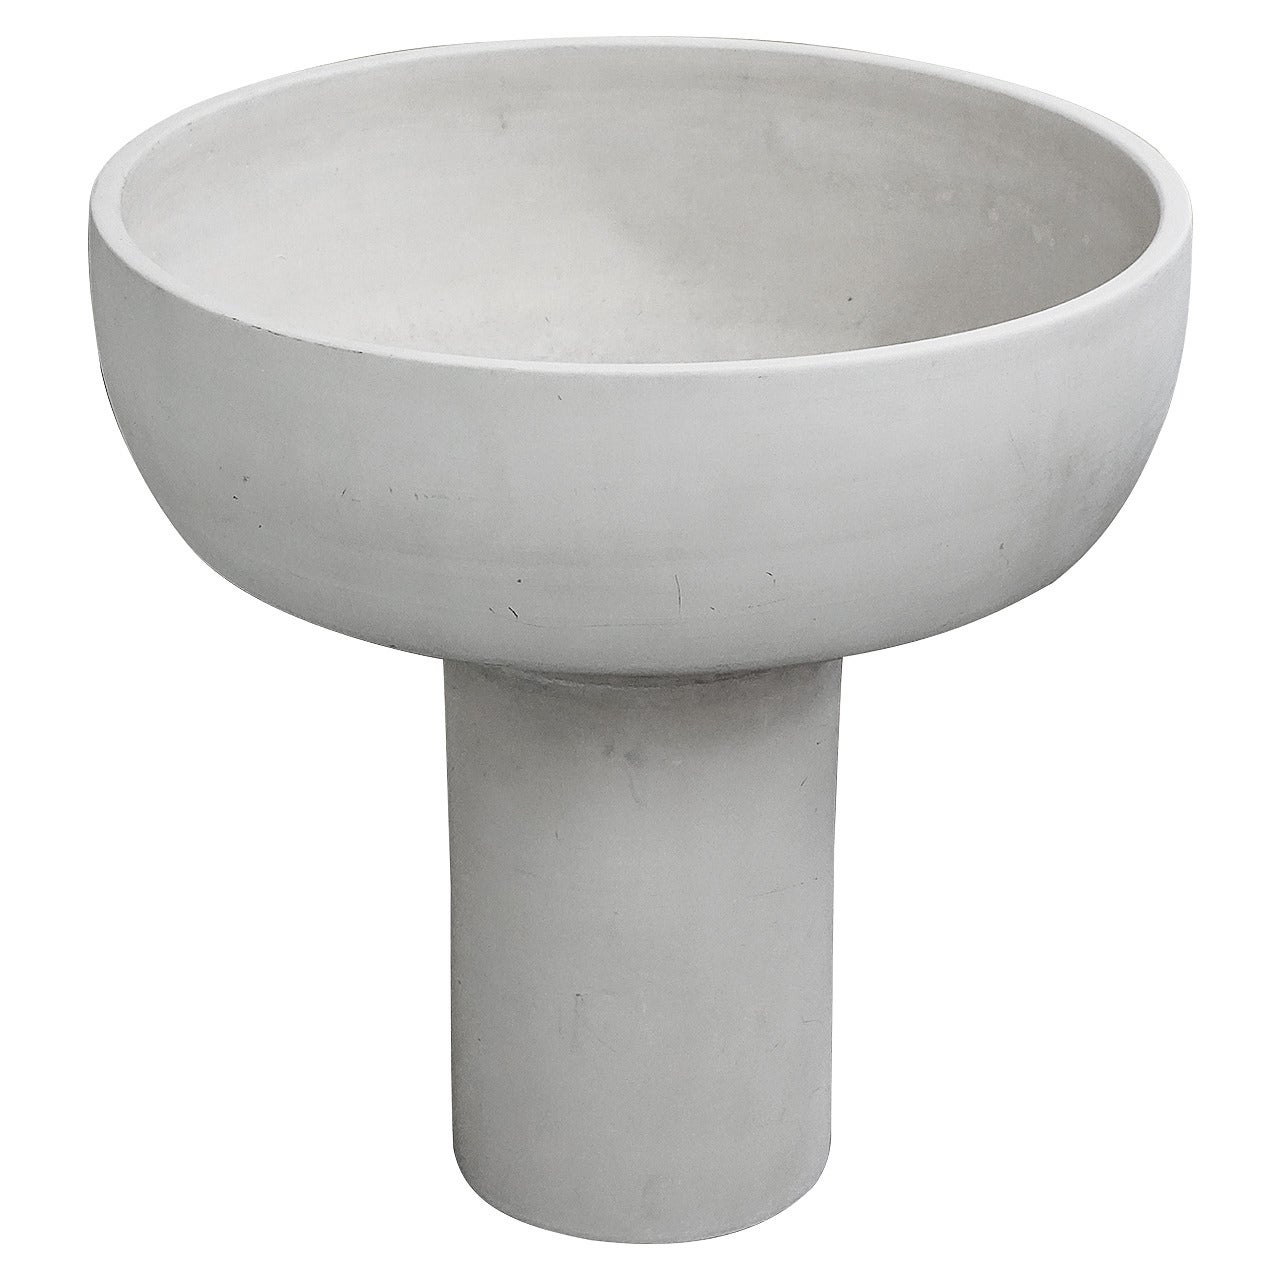 Bisque Planter by Architectural Pottery